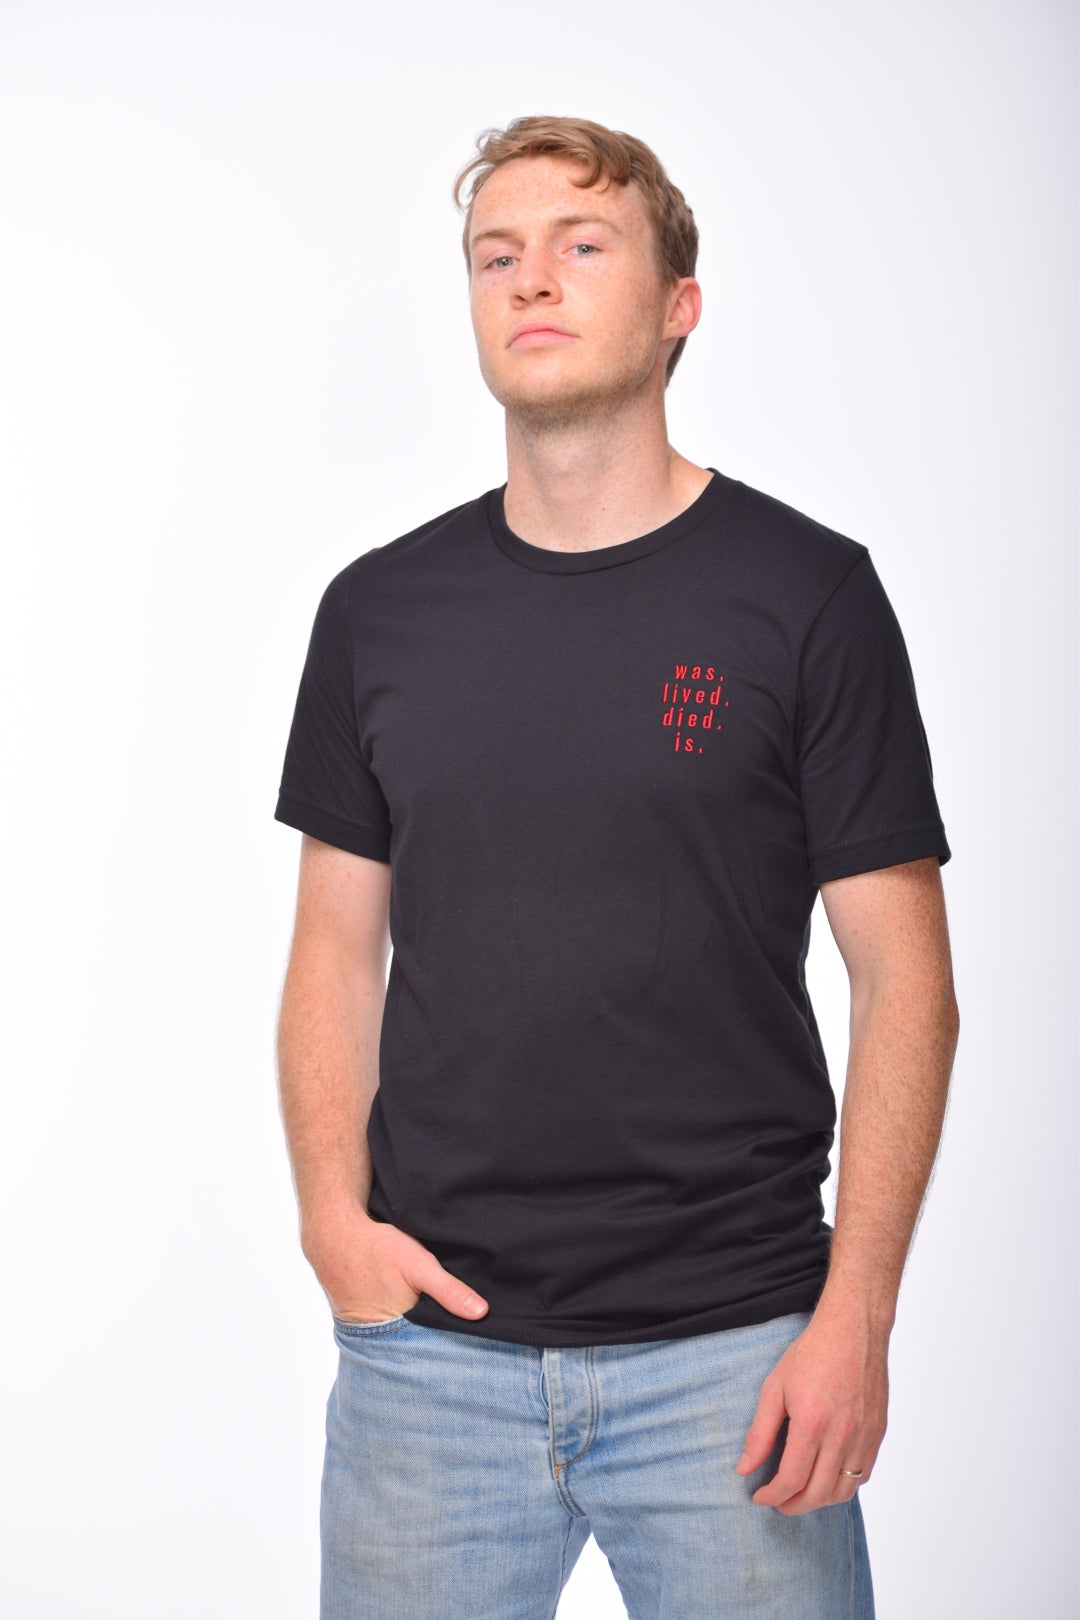 Was. Lived. Died. Is. Embroidered Premium Unisex T-Shirt